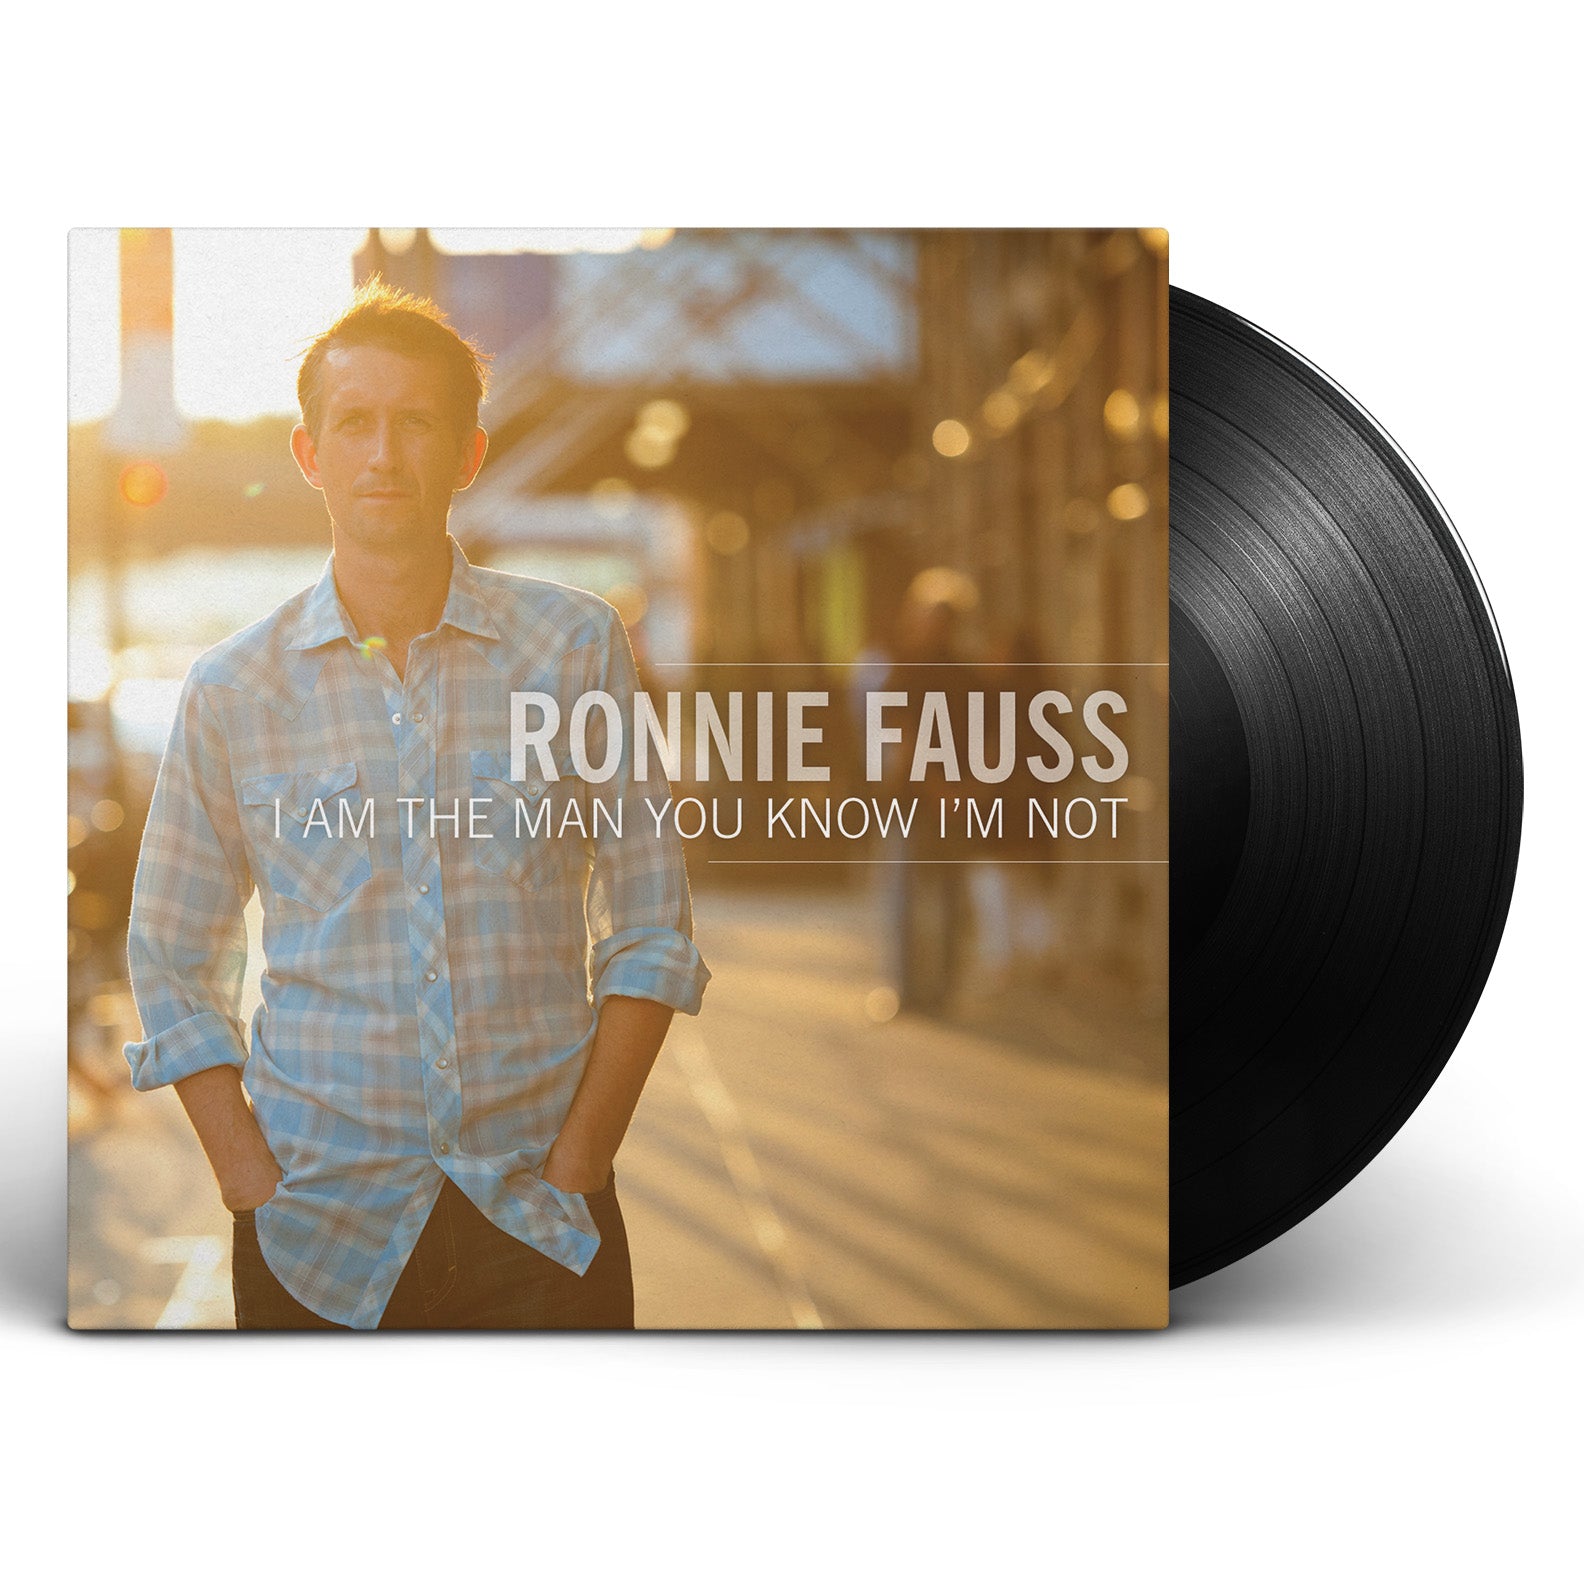 Ronnie Fauss - I Am The Man You Know I’m Not [Vinyl]